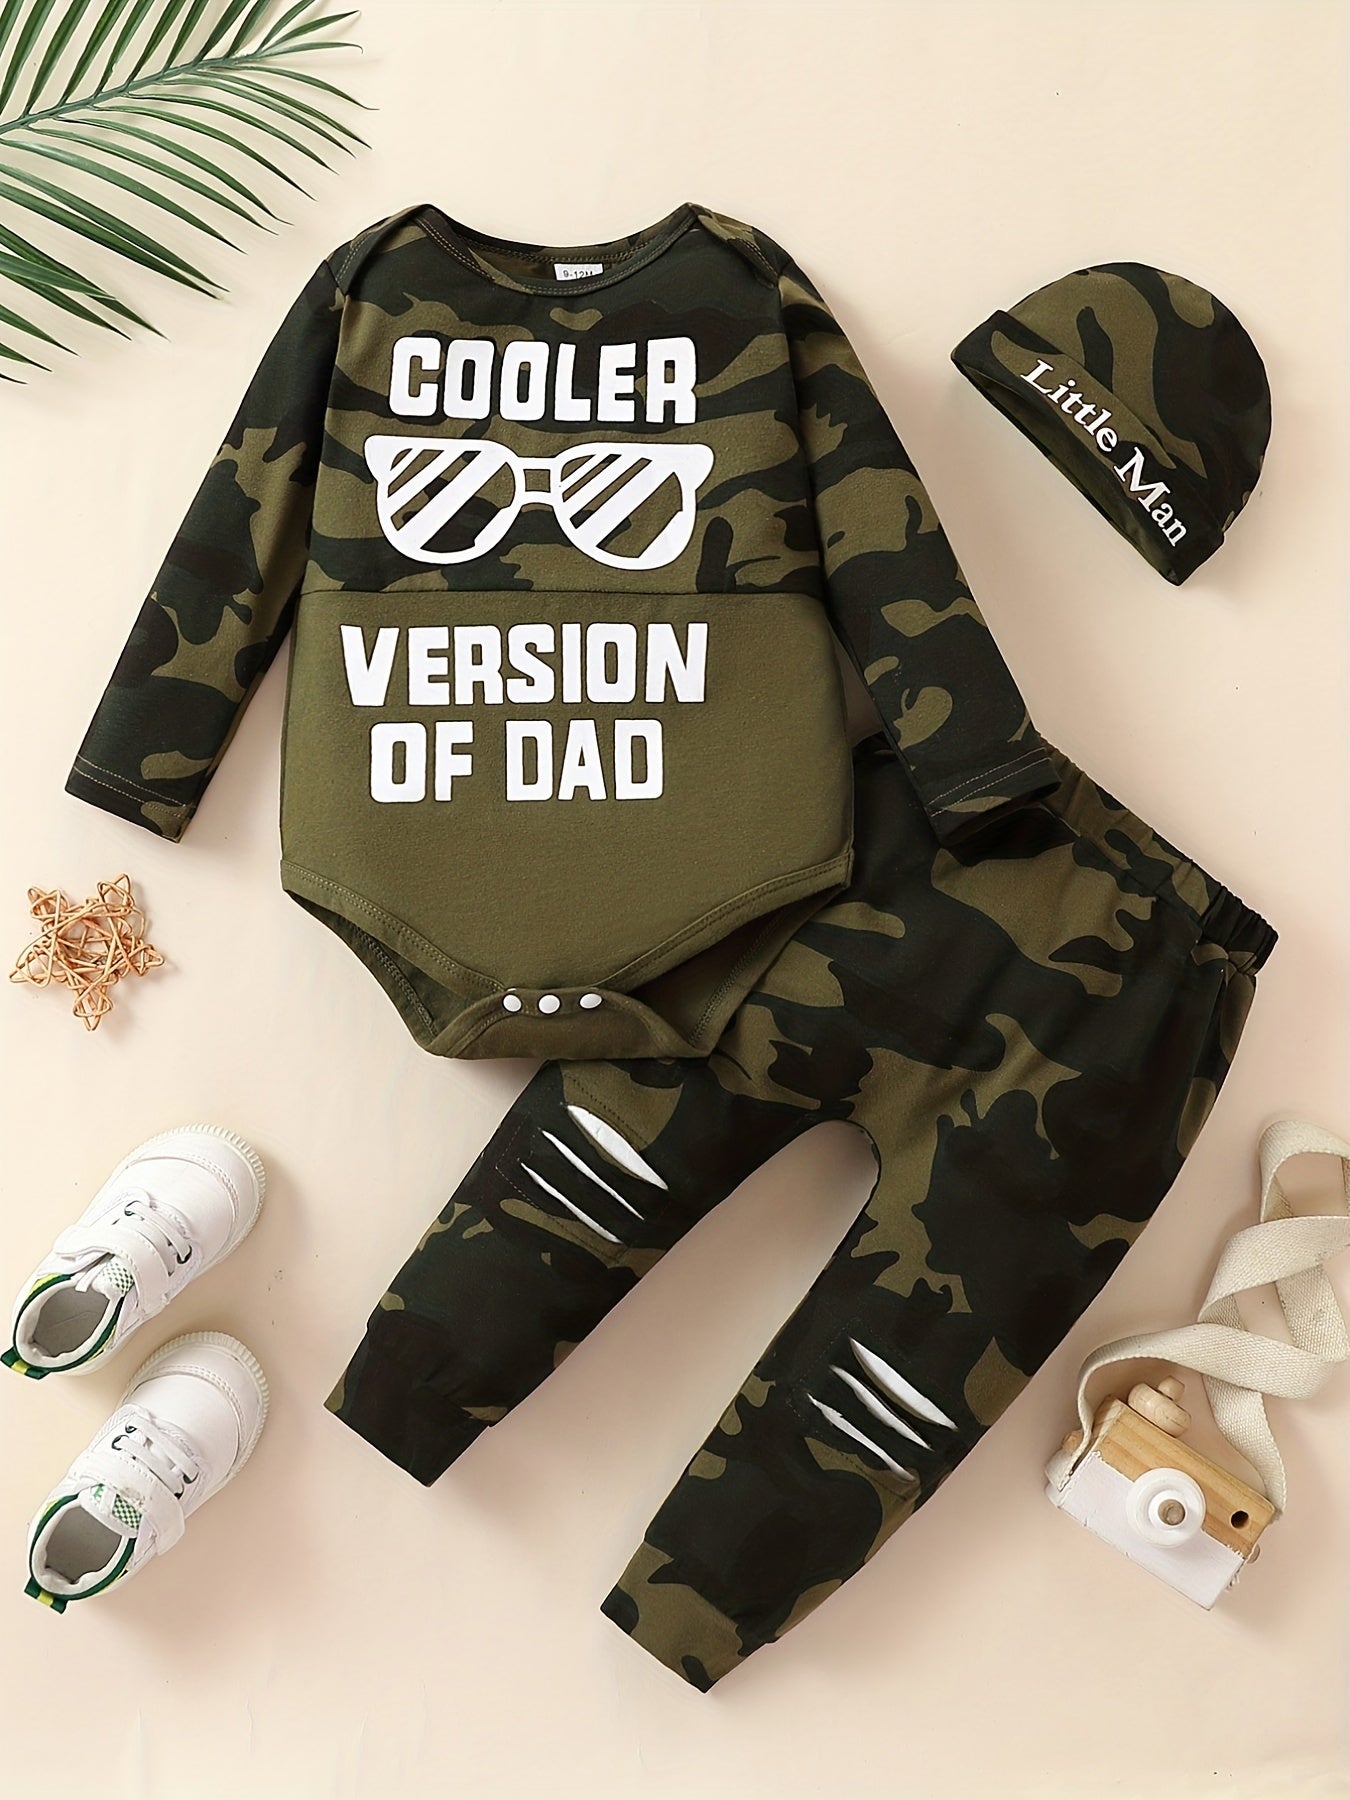 Baby Boy's Camouflage Long Sleeve Suit, NEW TO THE CREW Letter Printed Romper & Trousers Set, Cotton Comfy Casual Set For Newborn